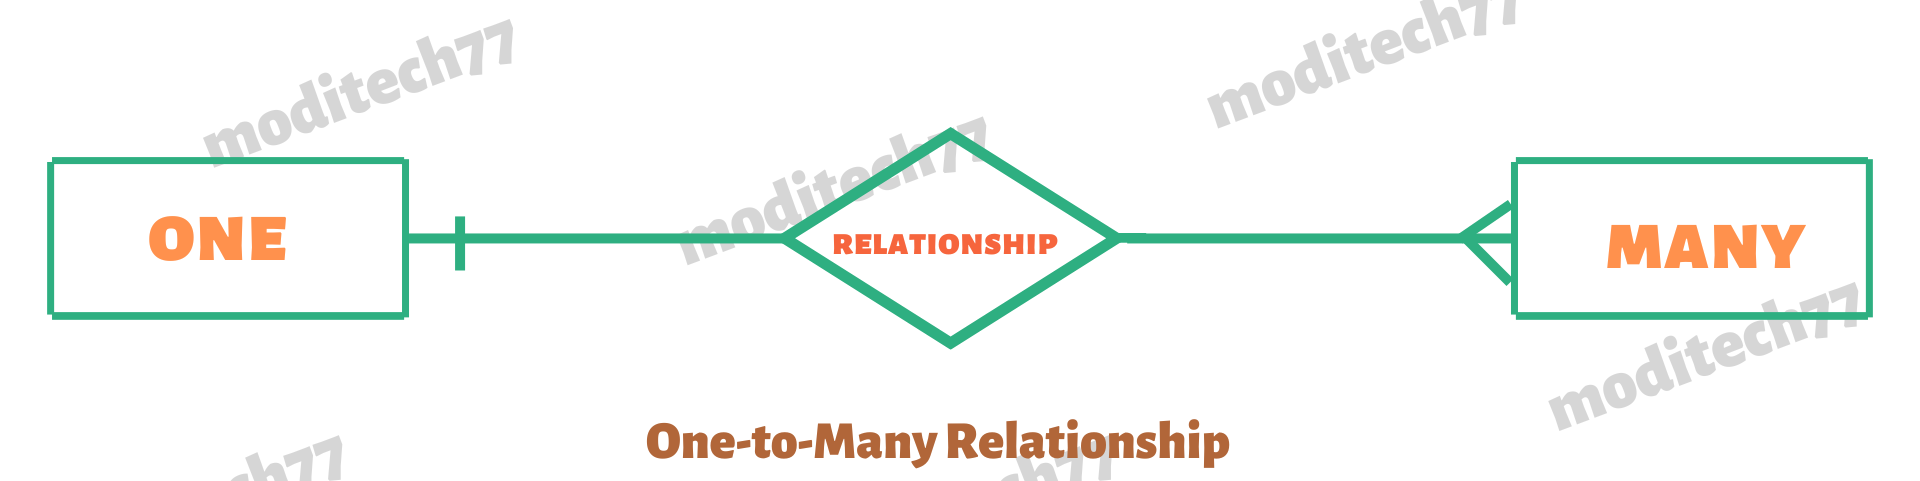 One-to-Many Relationships